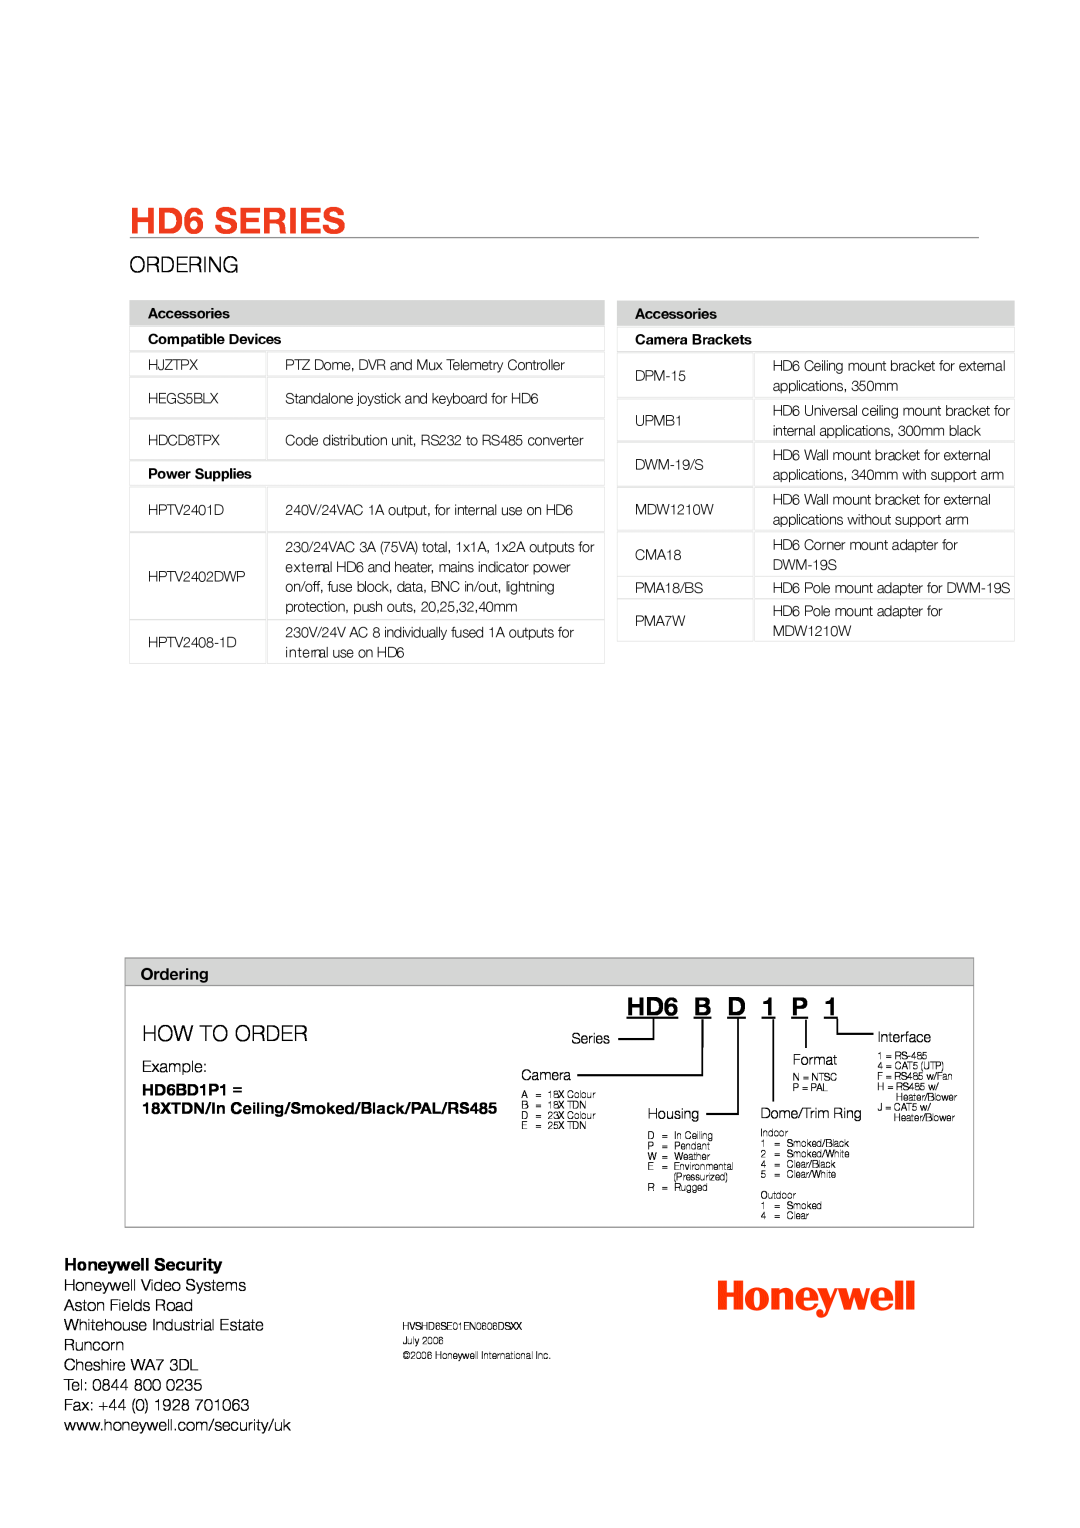 Honeywell manual Ordering, How To Order, HD6BD1P1 =, 18XTDN/In Ceiling/Smoked/Black/PAL/RS485, HD6 SERIES, HD6 B D 1 P 